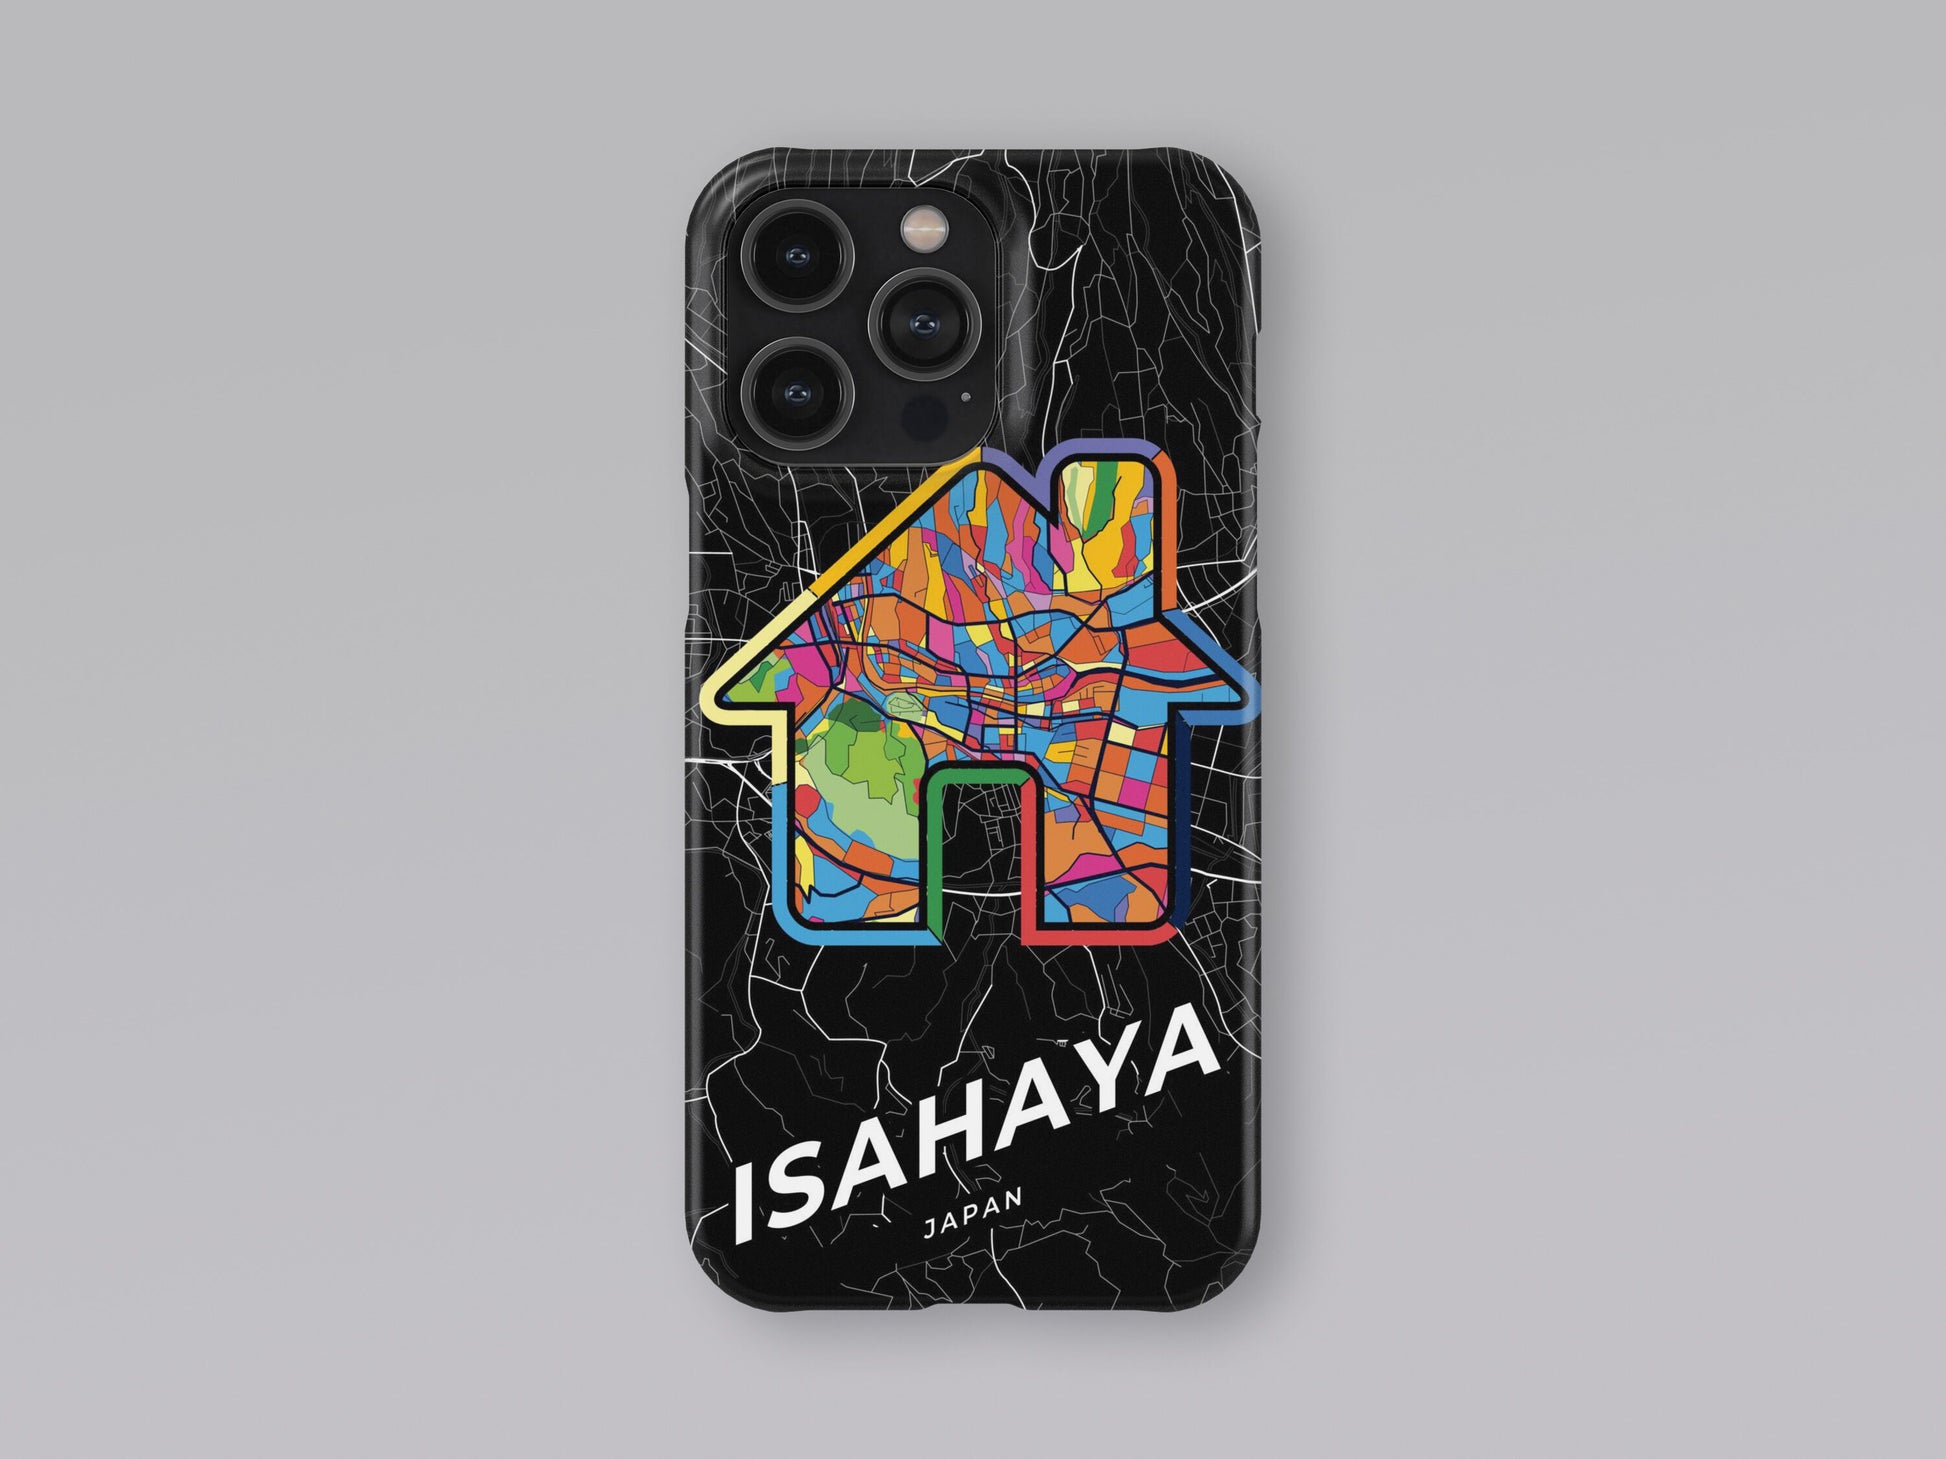 Isahaya Japan slim phone case with colorful icon. Birthday, wedding or housewarming gift. Couple match cases. 3